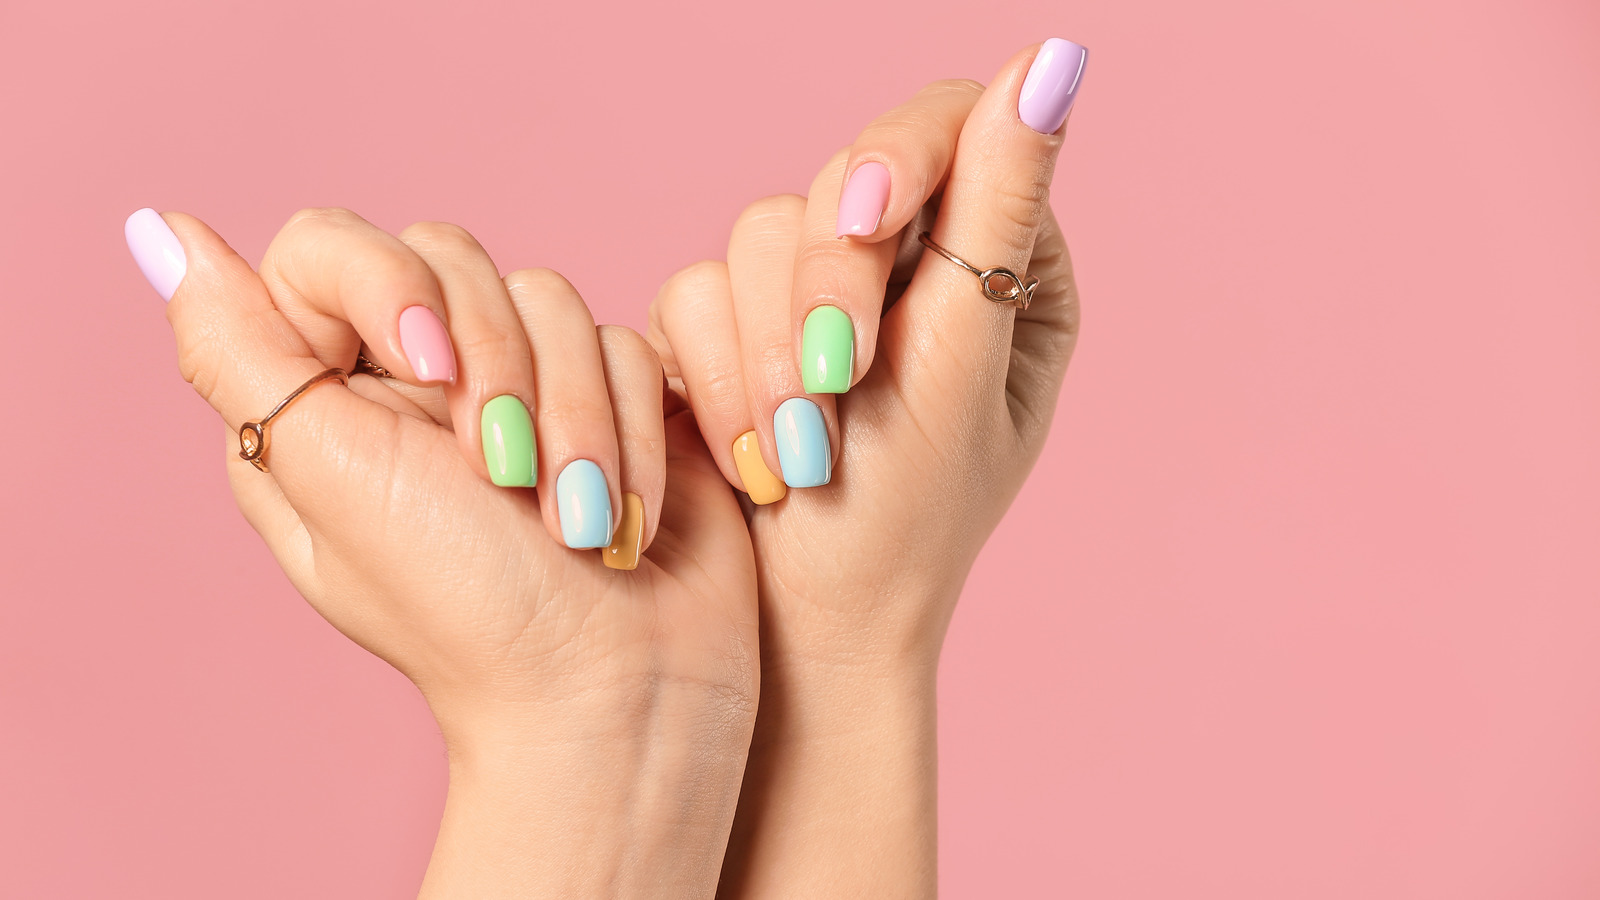 Here's What Happens To Your Nails If You Wear Nail Polish Every Day